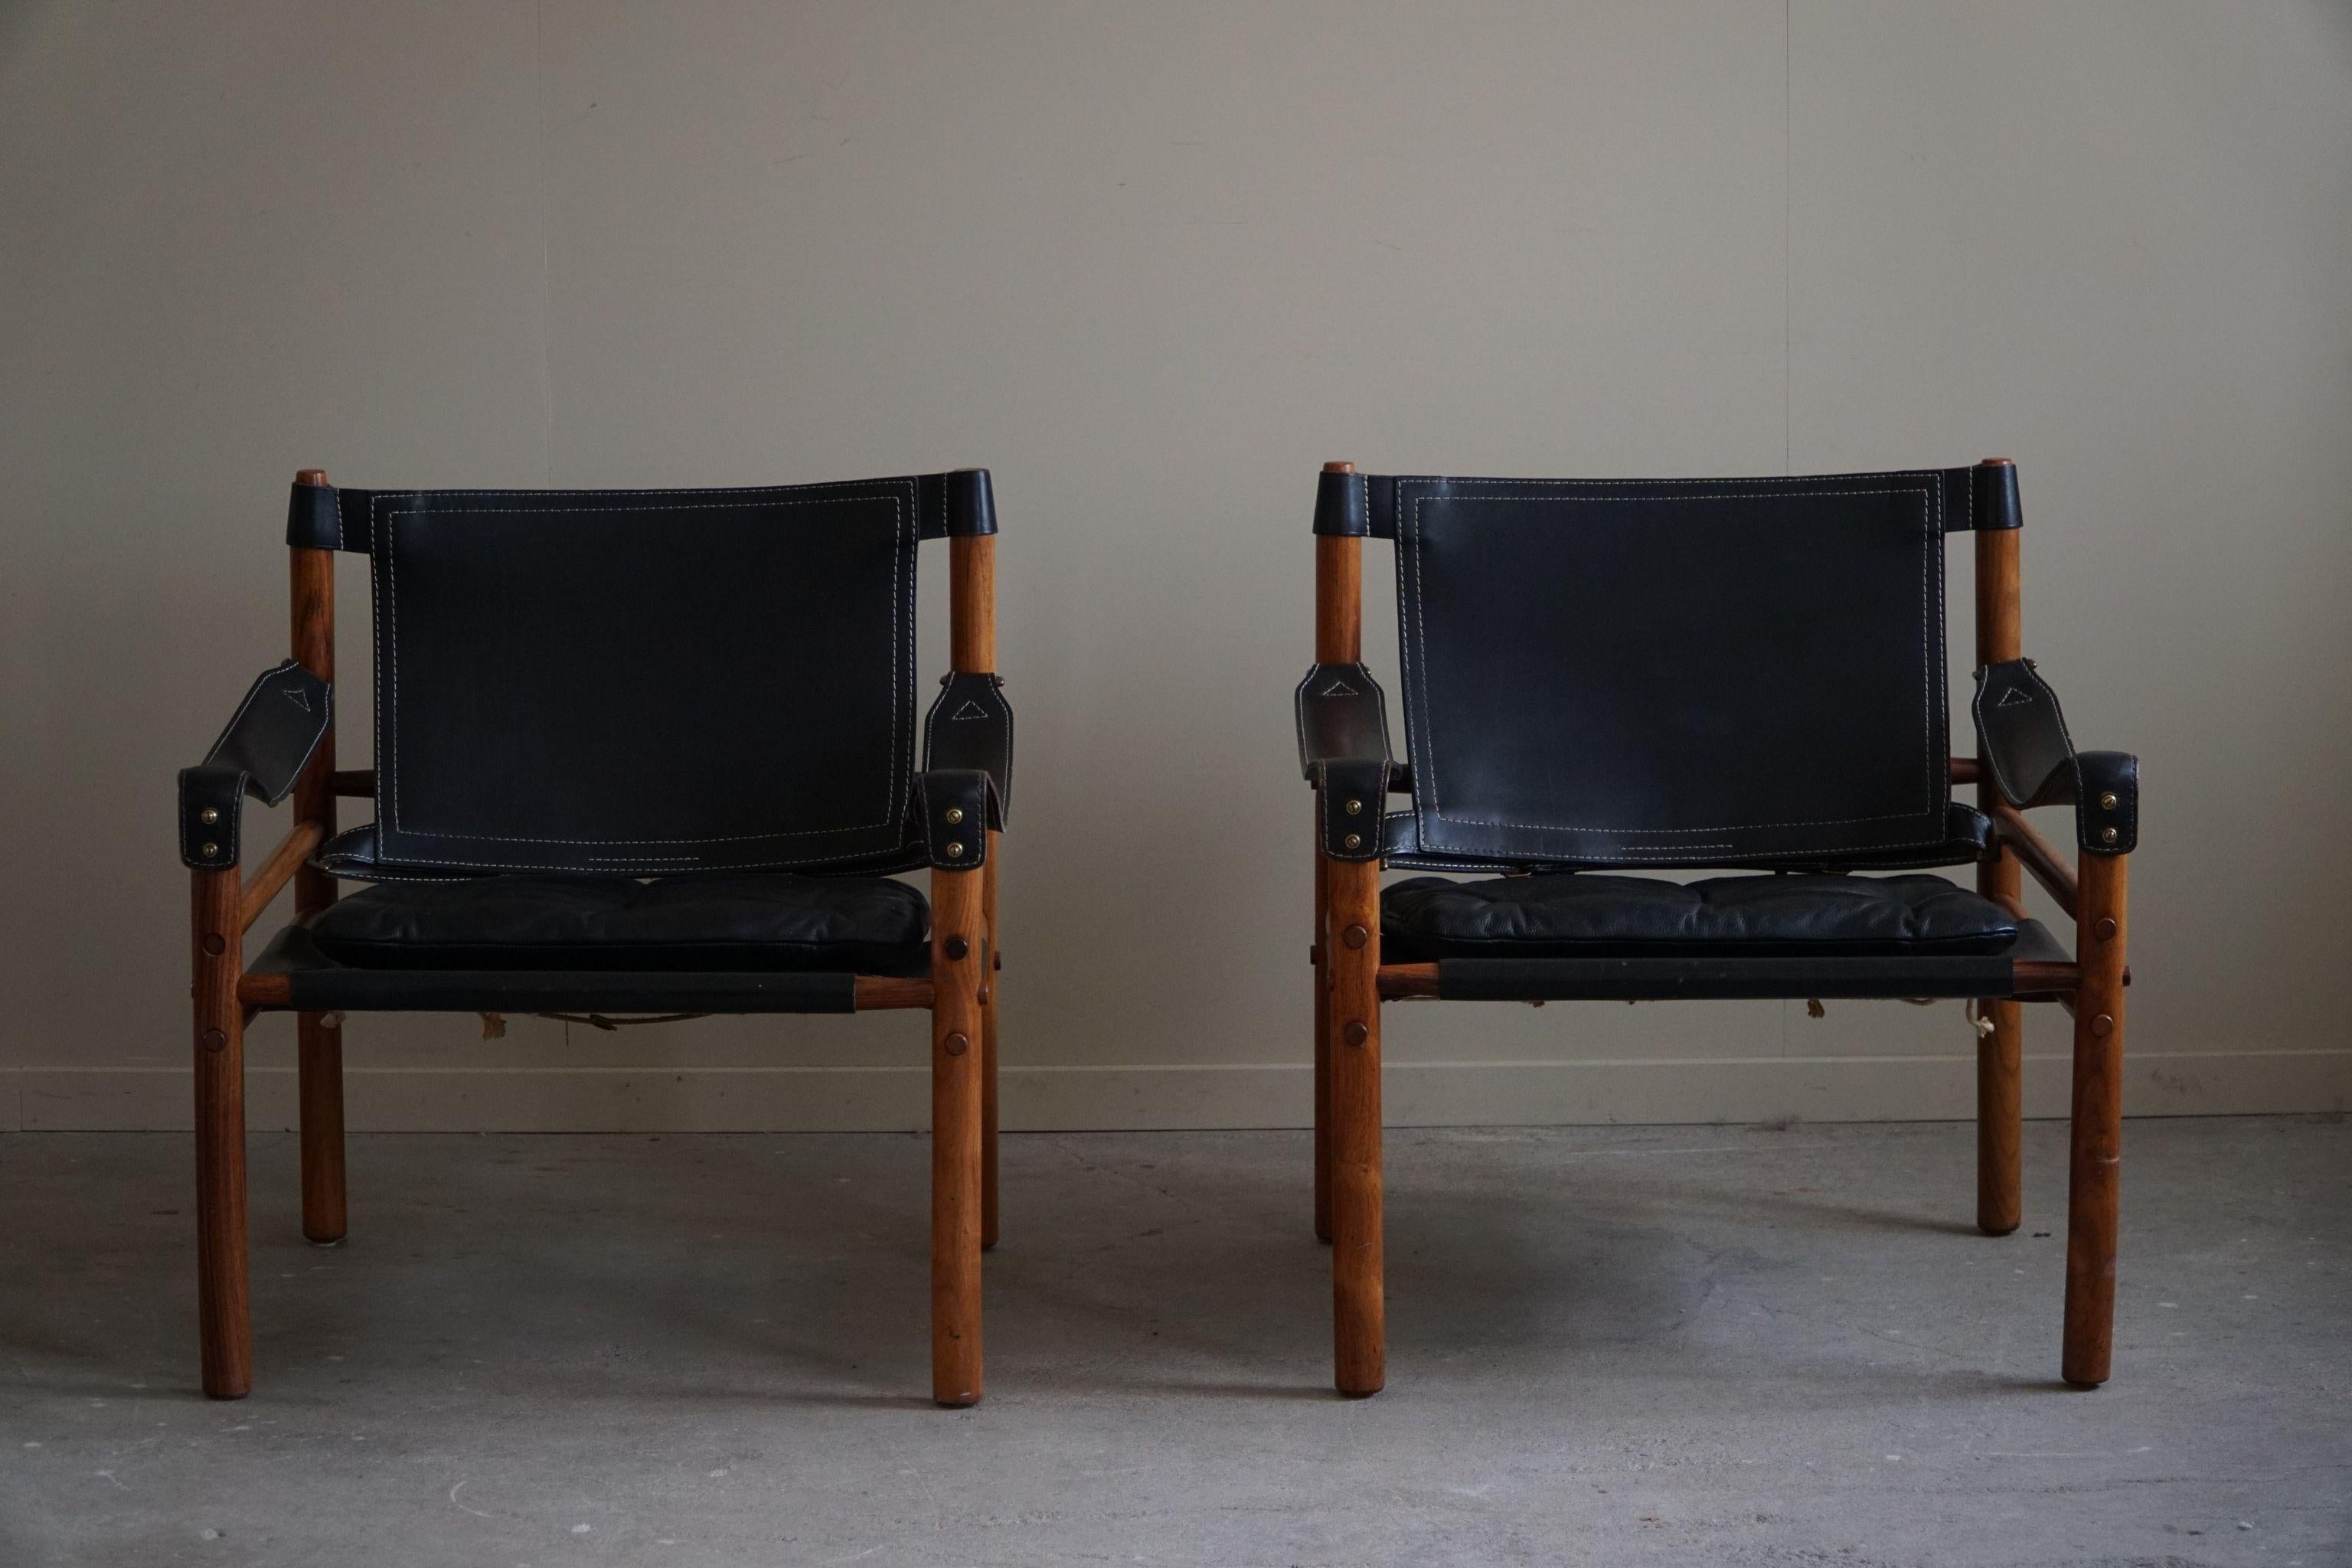 Pair of Sirocco Lounge Chairs in Rosewood, Arne Norell, Ab Aneby, 1960s For Sale 10